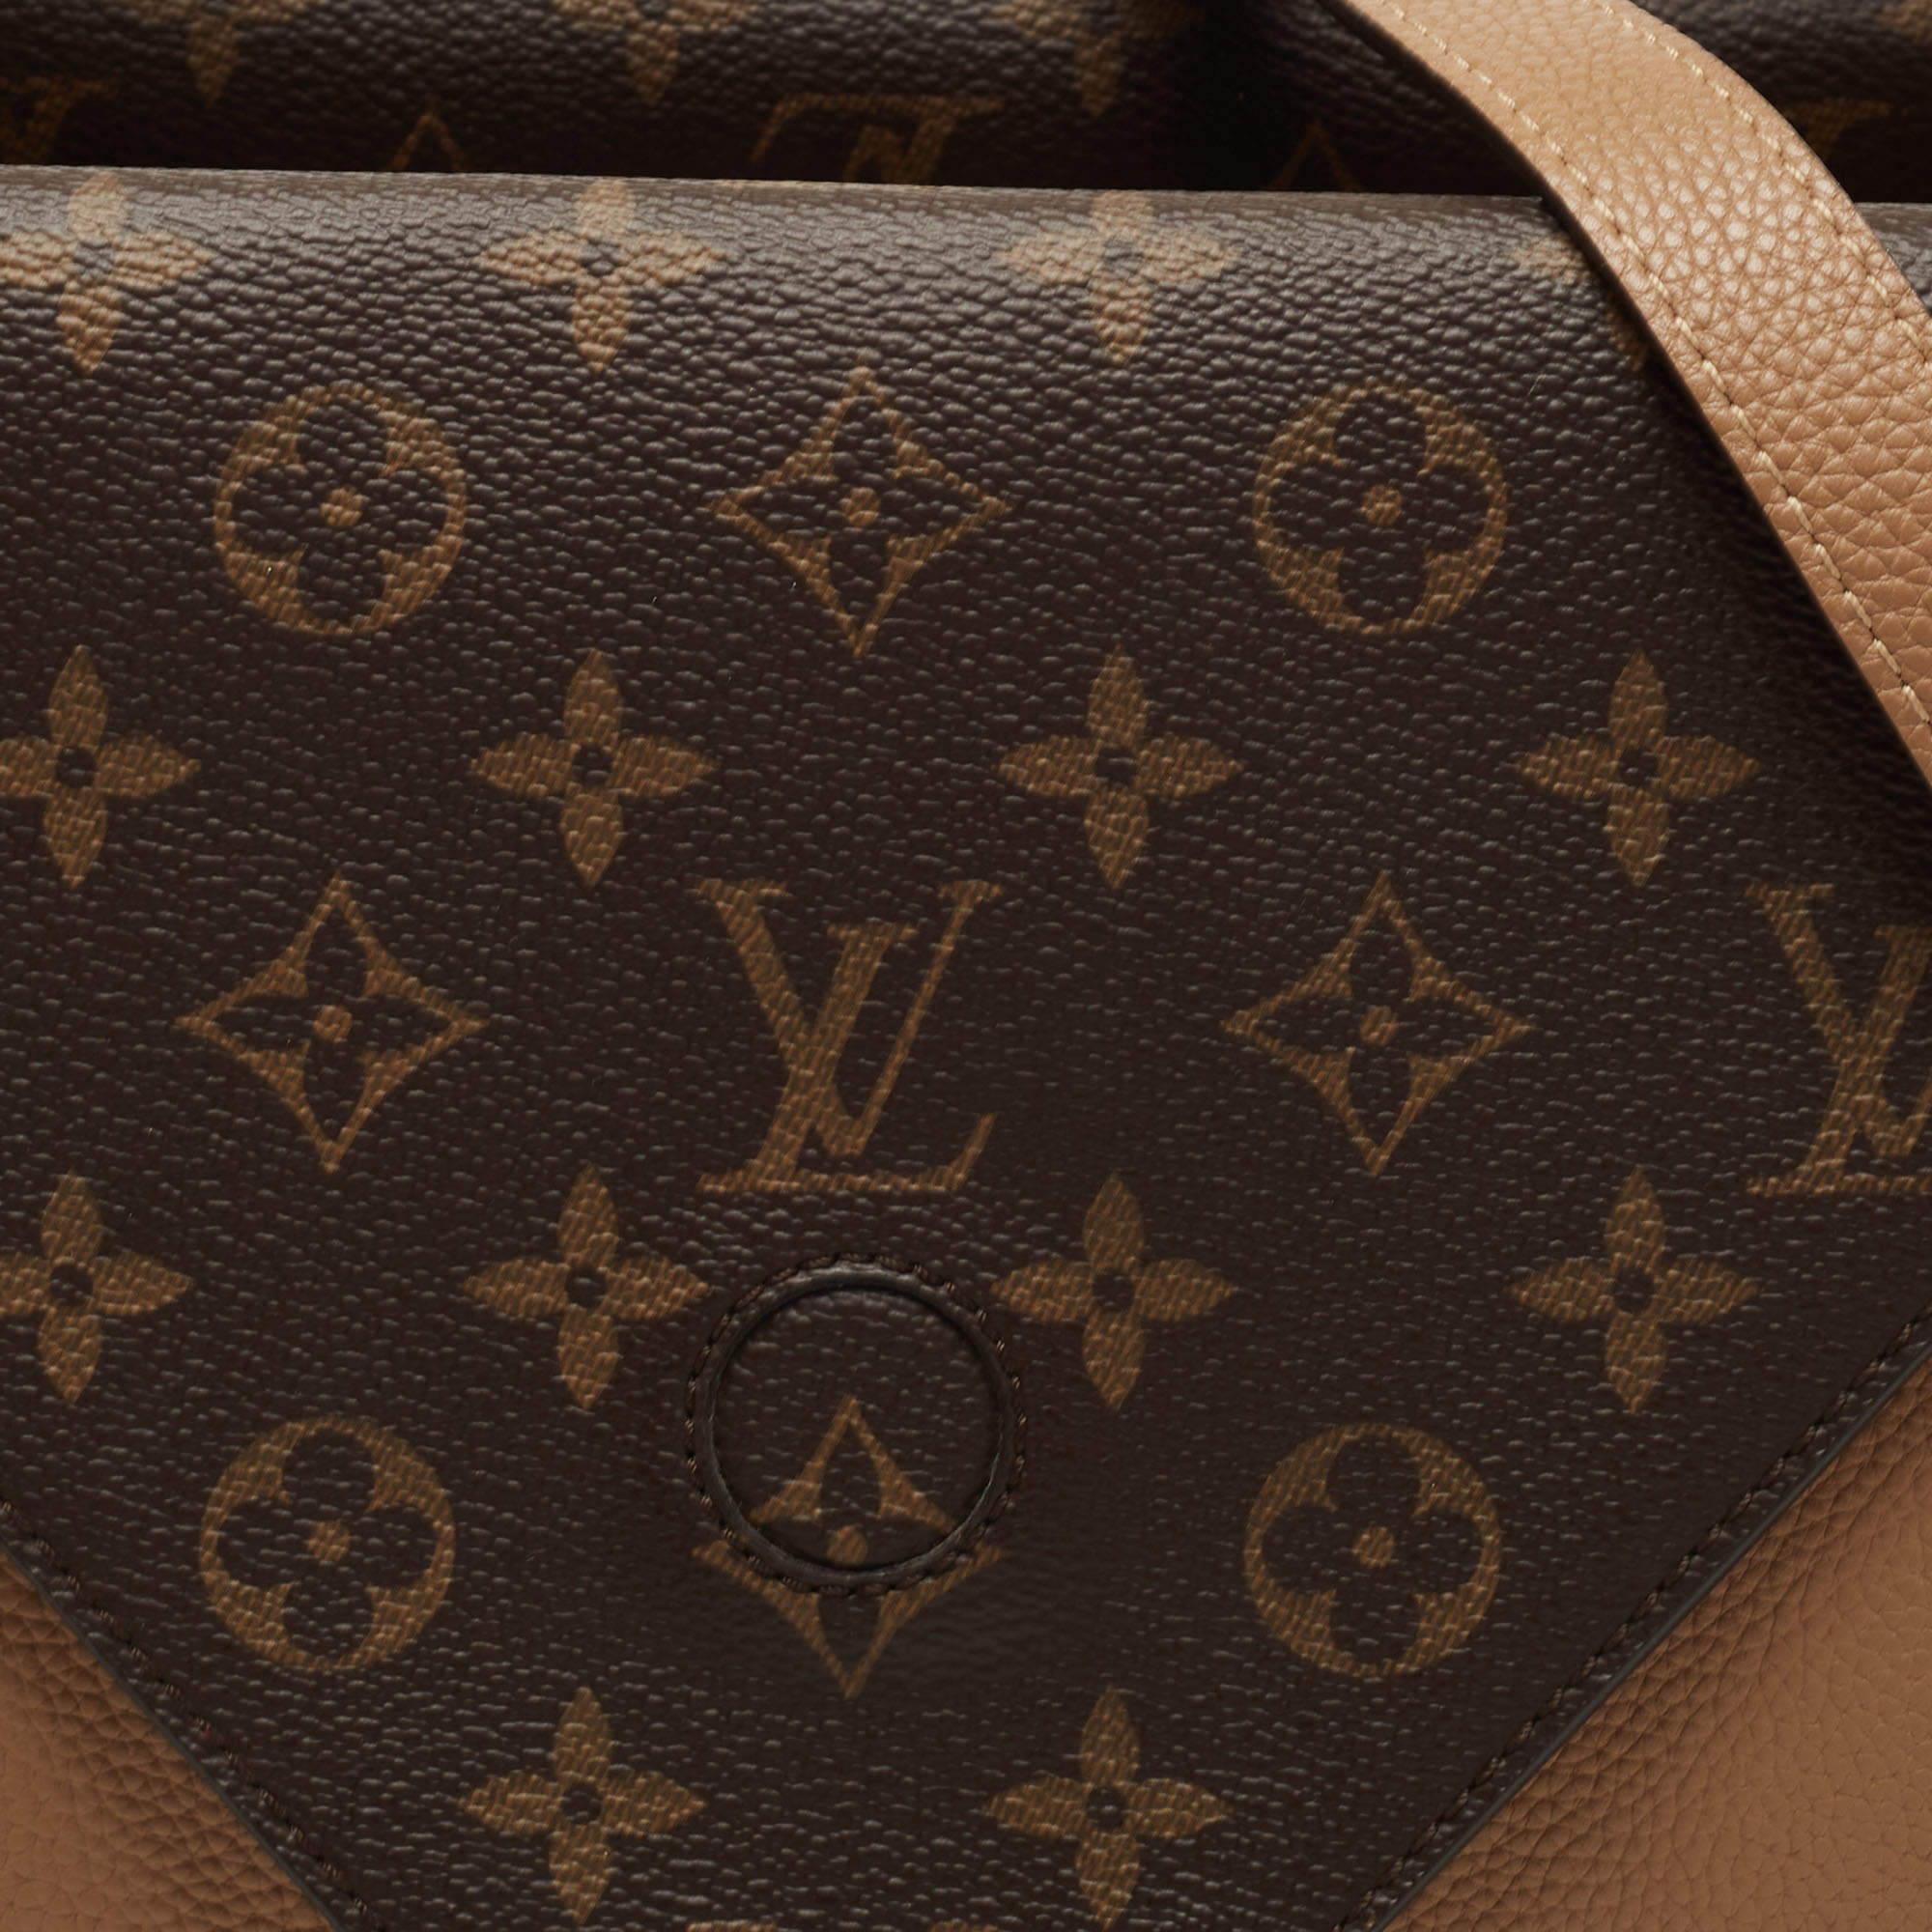 Louis Vuitton Sesame Leather and Monogram Coated Canvas Double V